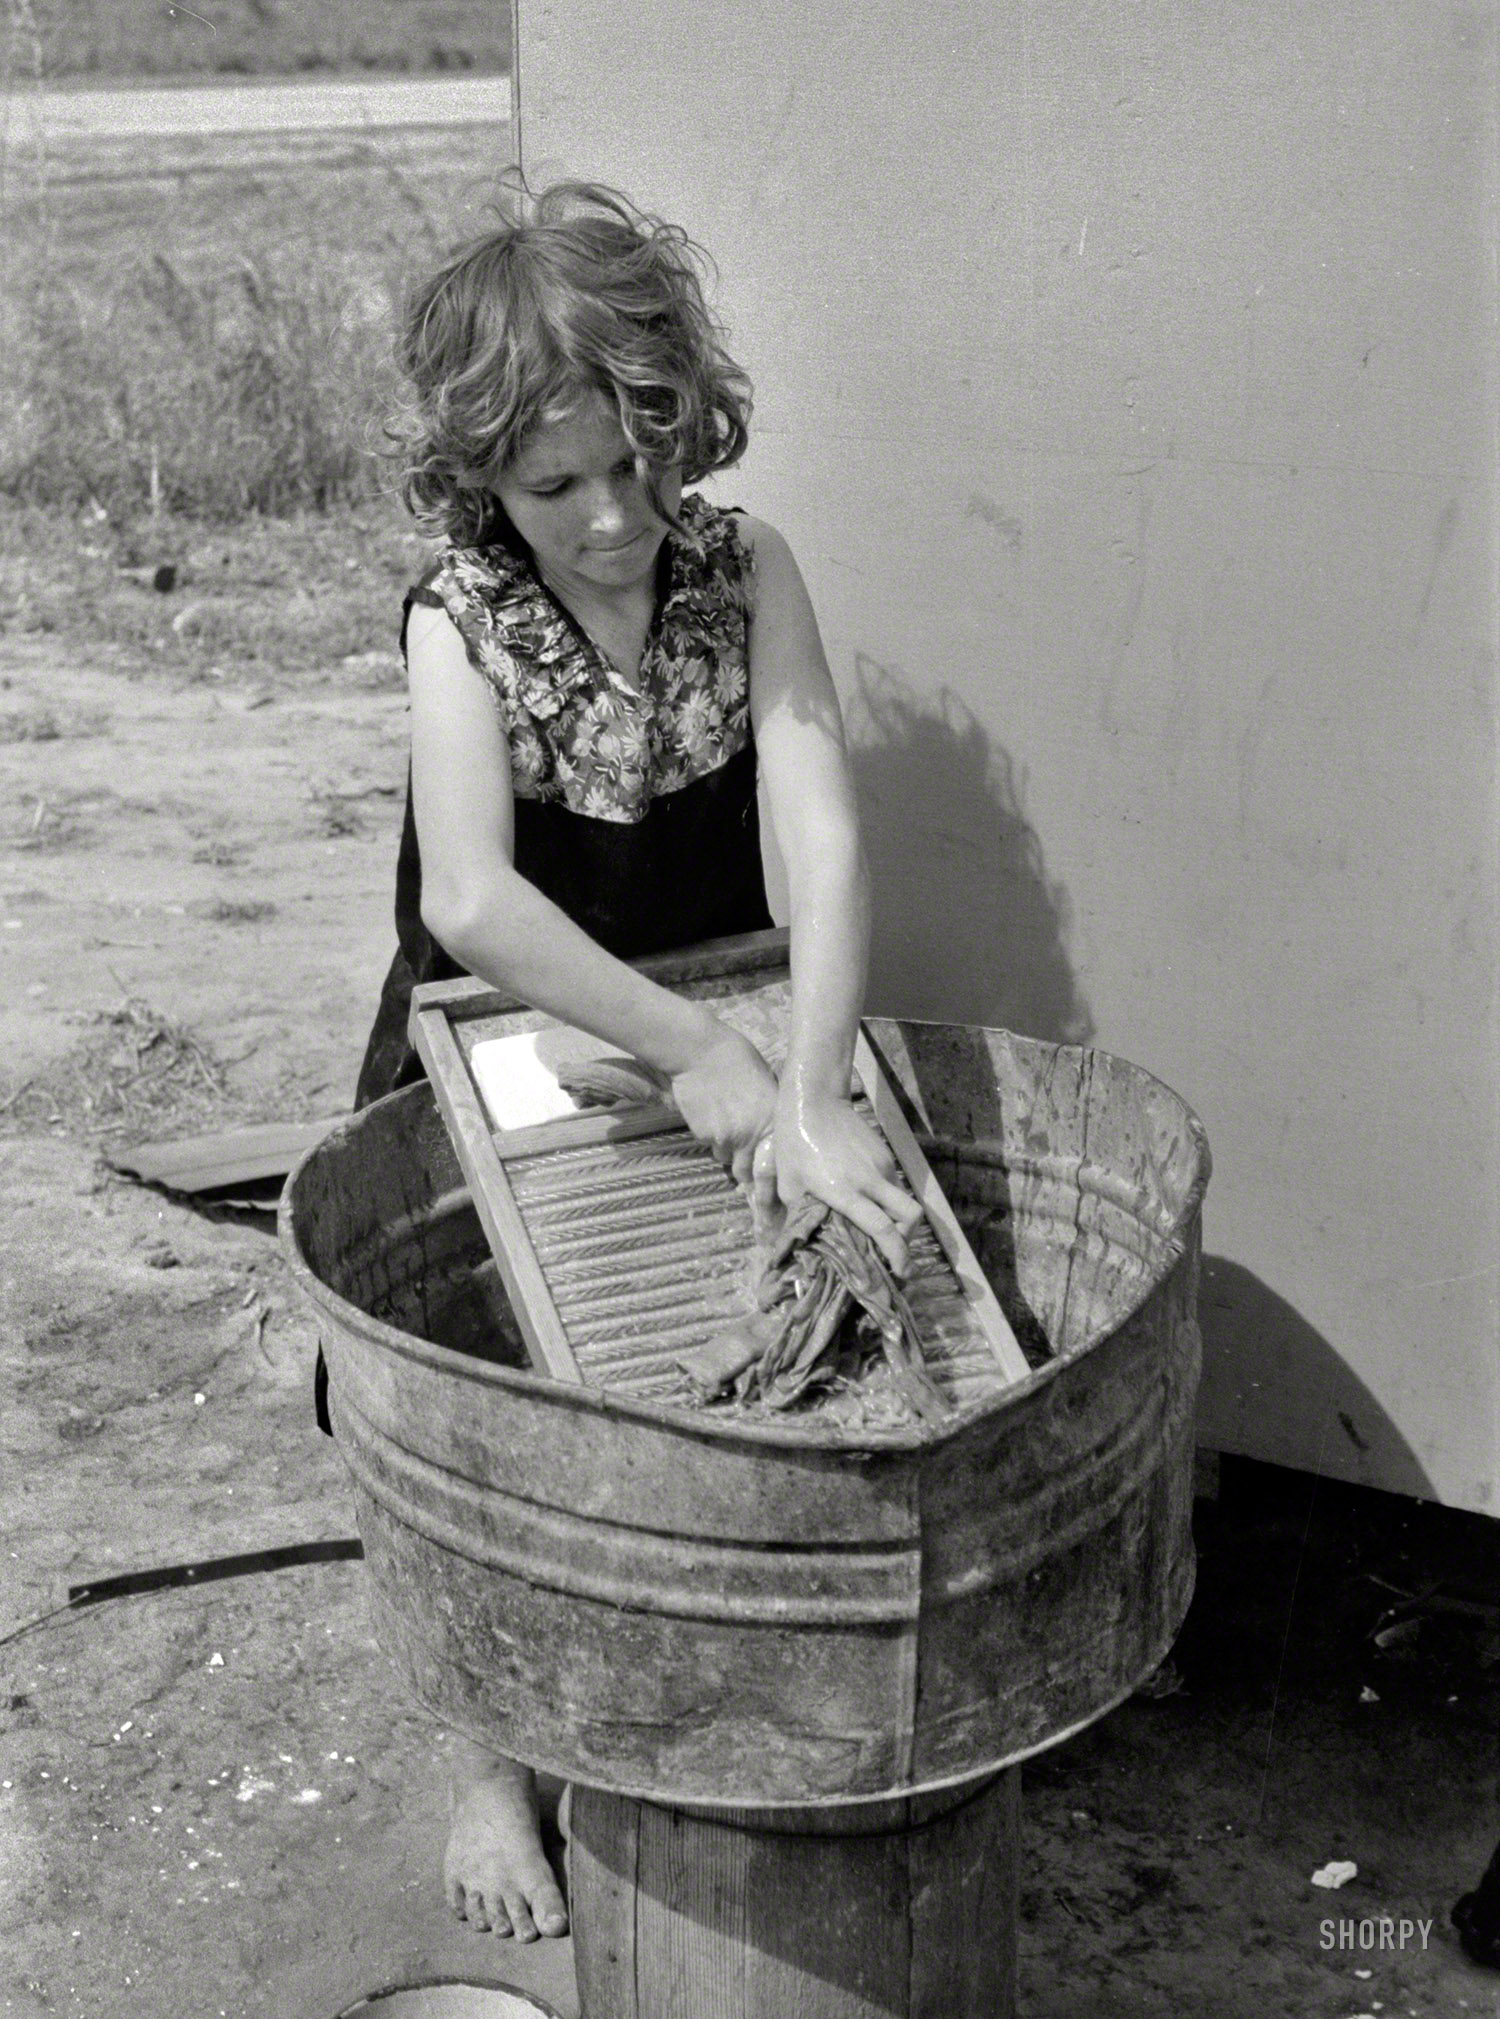 February 1939. "Twelve-year-old girl who keeps house in a trailer for her three brothers who are migrant workers, near Harlingen, Texas." 35mm nitrate negative by Russell Lee for the Farm Security Administration. View full size.